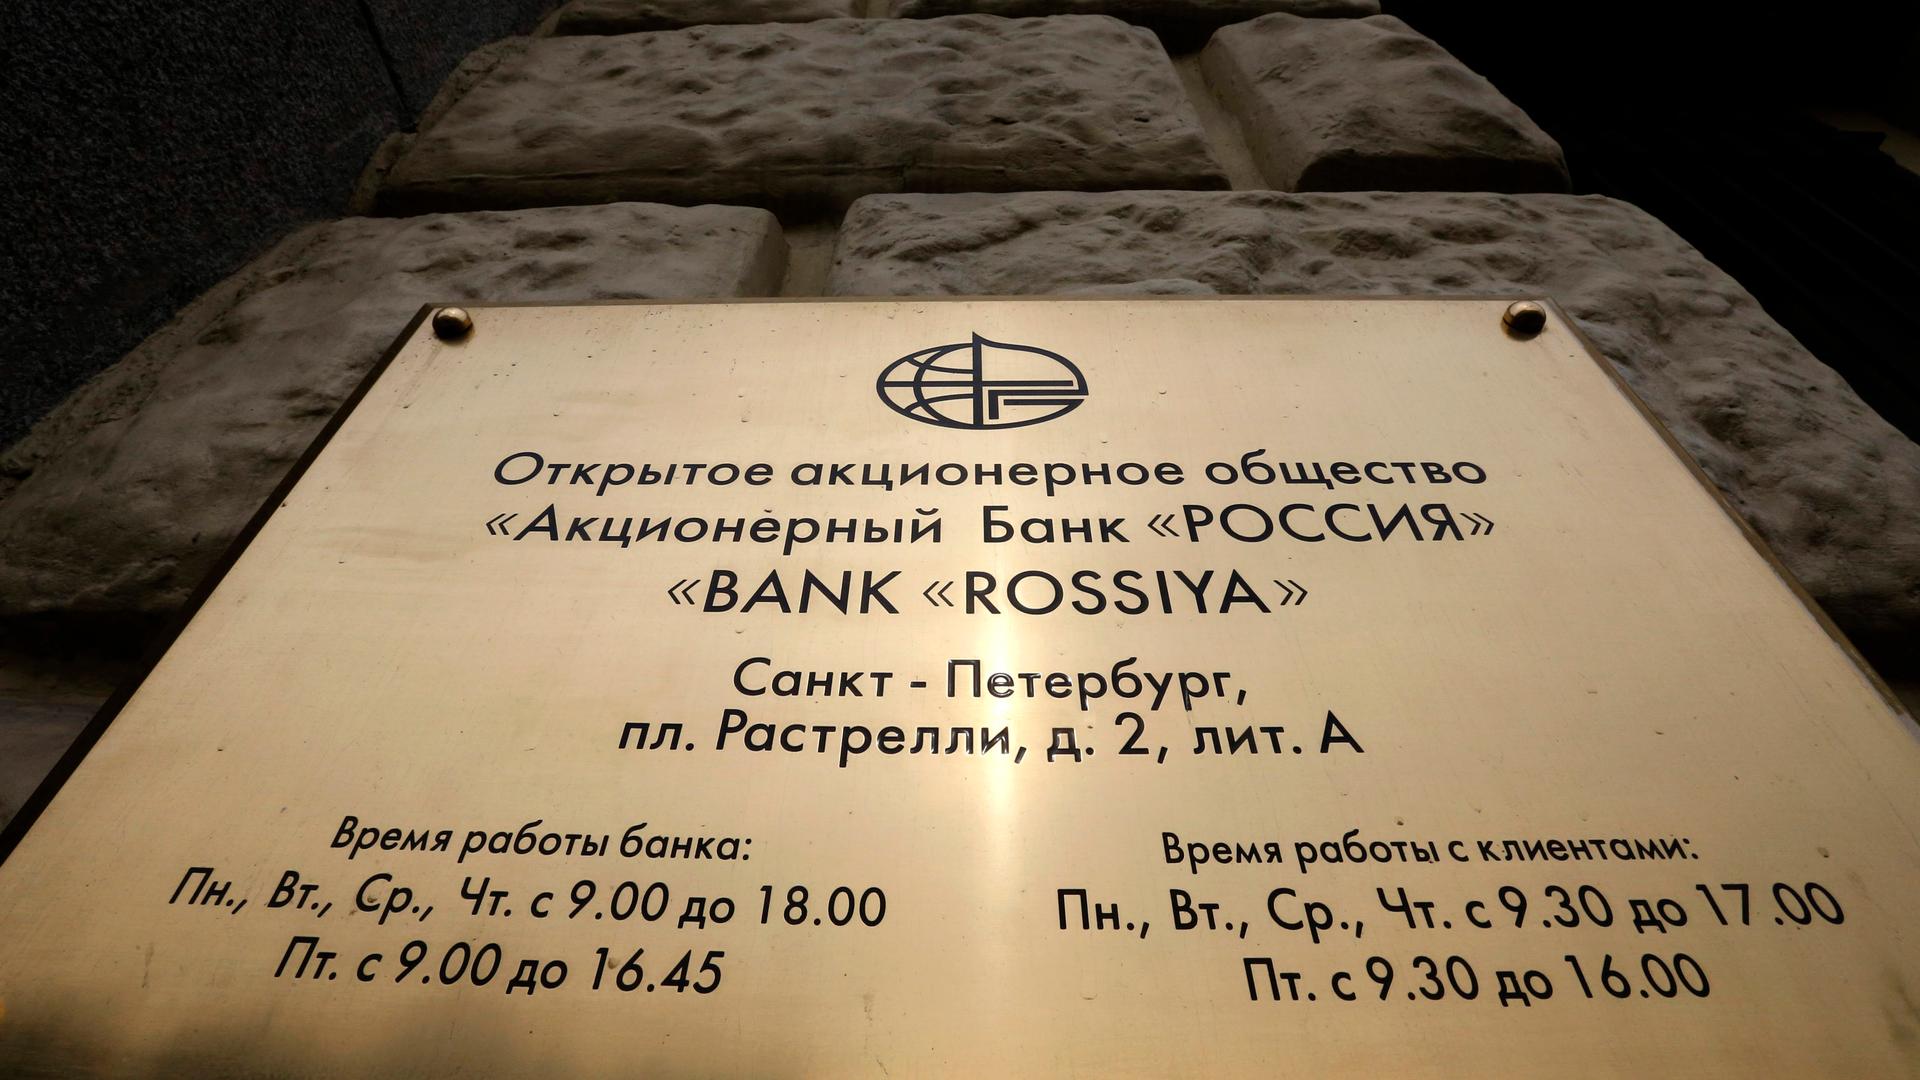 The address plaque of Bank Rossiya outside the bank's head office in St. Petersburg.